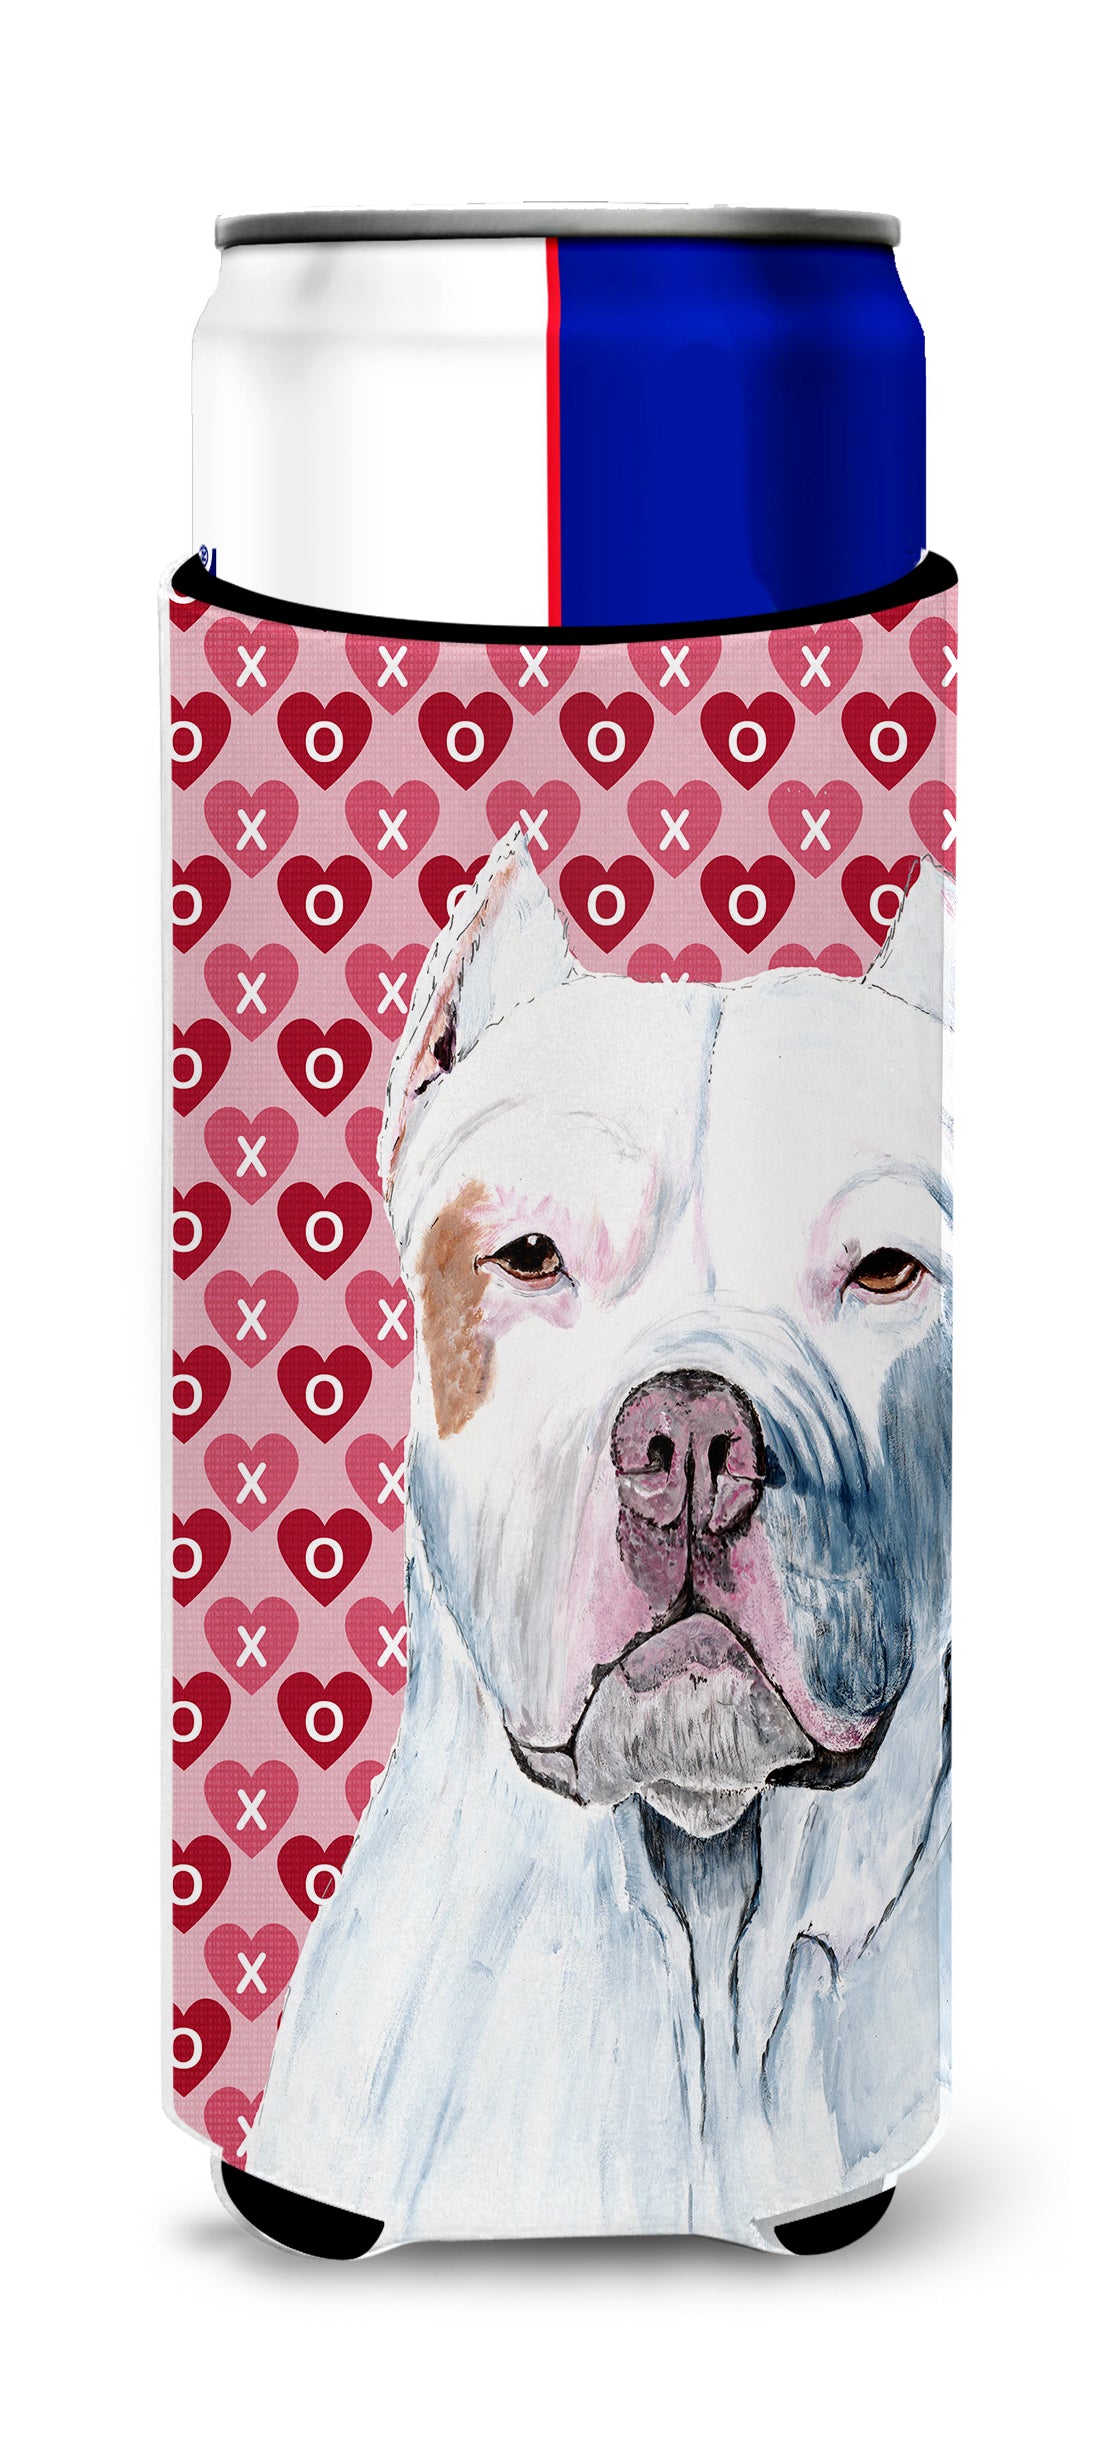 Pit Bull Hearts Love and Valentine's Day Portrait Ultra Beverage Insulators for slim cans SC9258MUK